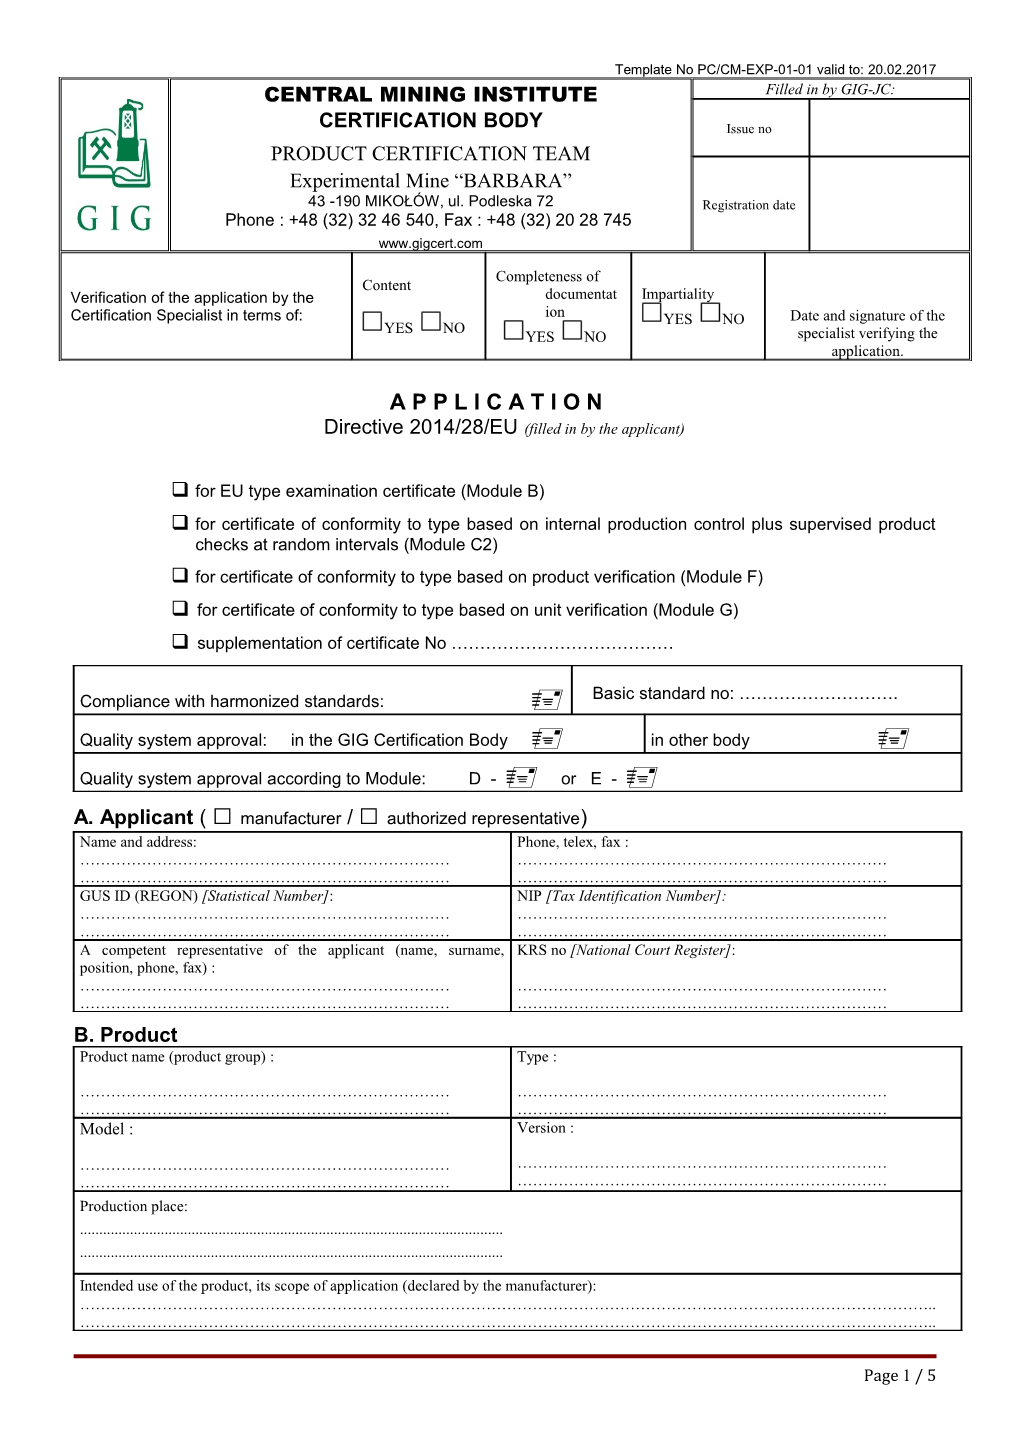 Directive 2014/28/EU (Filled in by the Applicant)